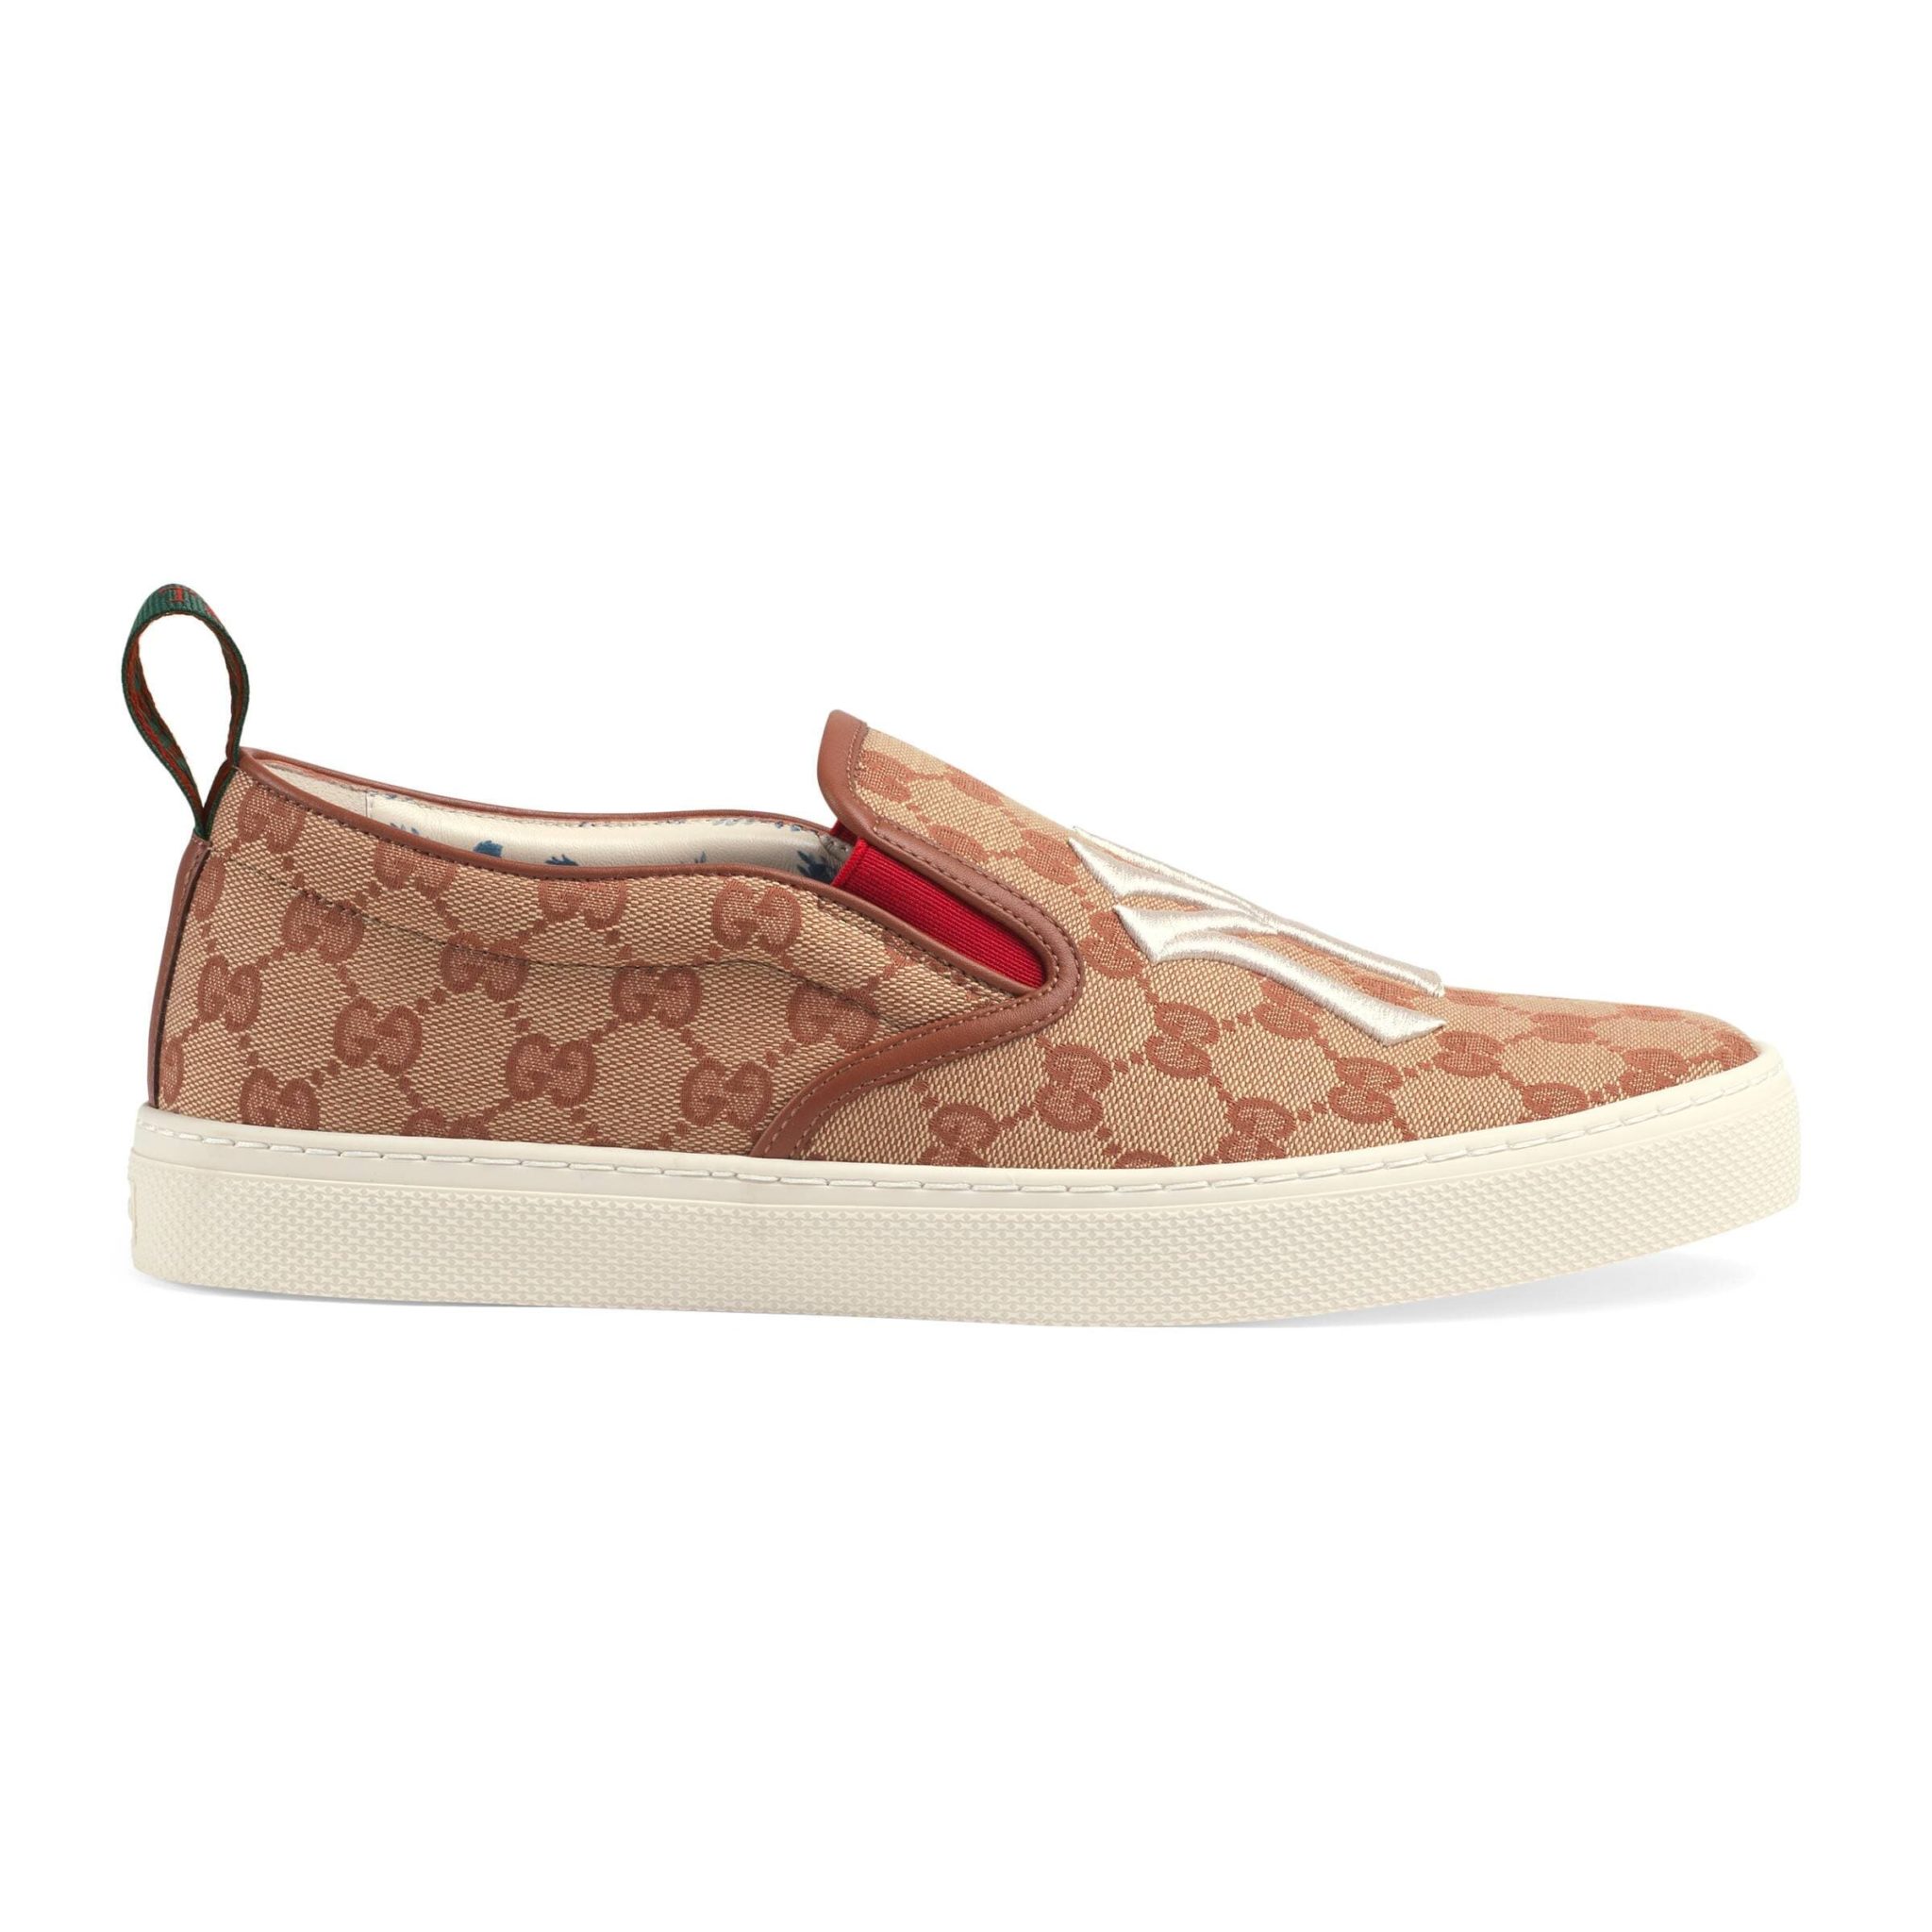 woocommerce-673321-2209615.cloudwaysapps.com-gucci-mens-beige-gg-canvas-ny-yankees-patch-slip-on-sneakers